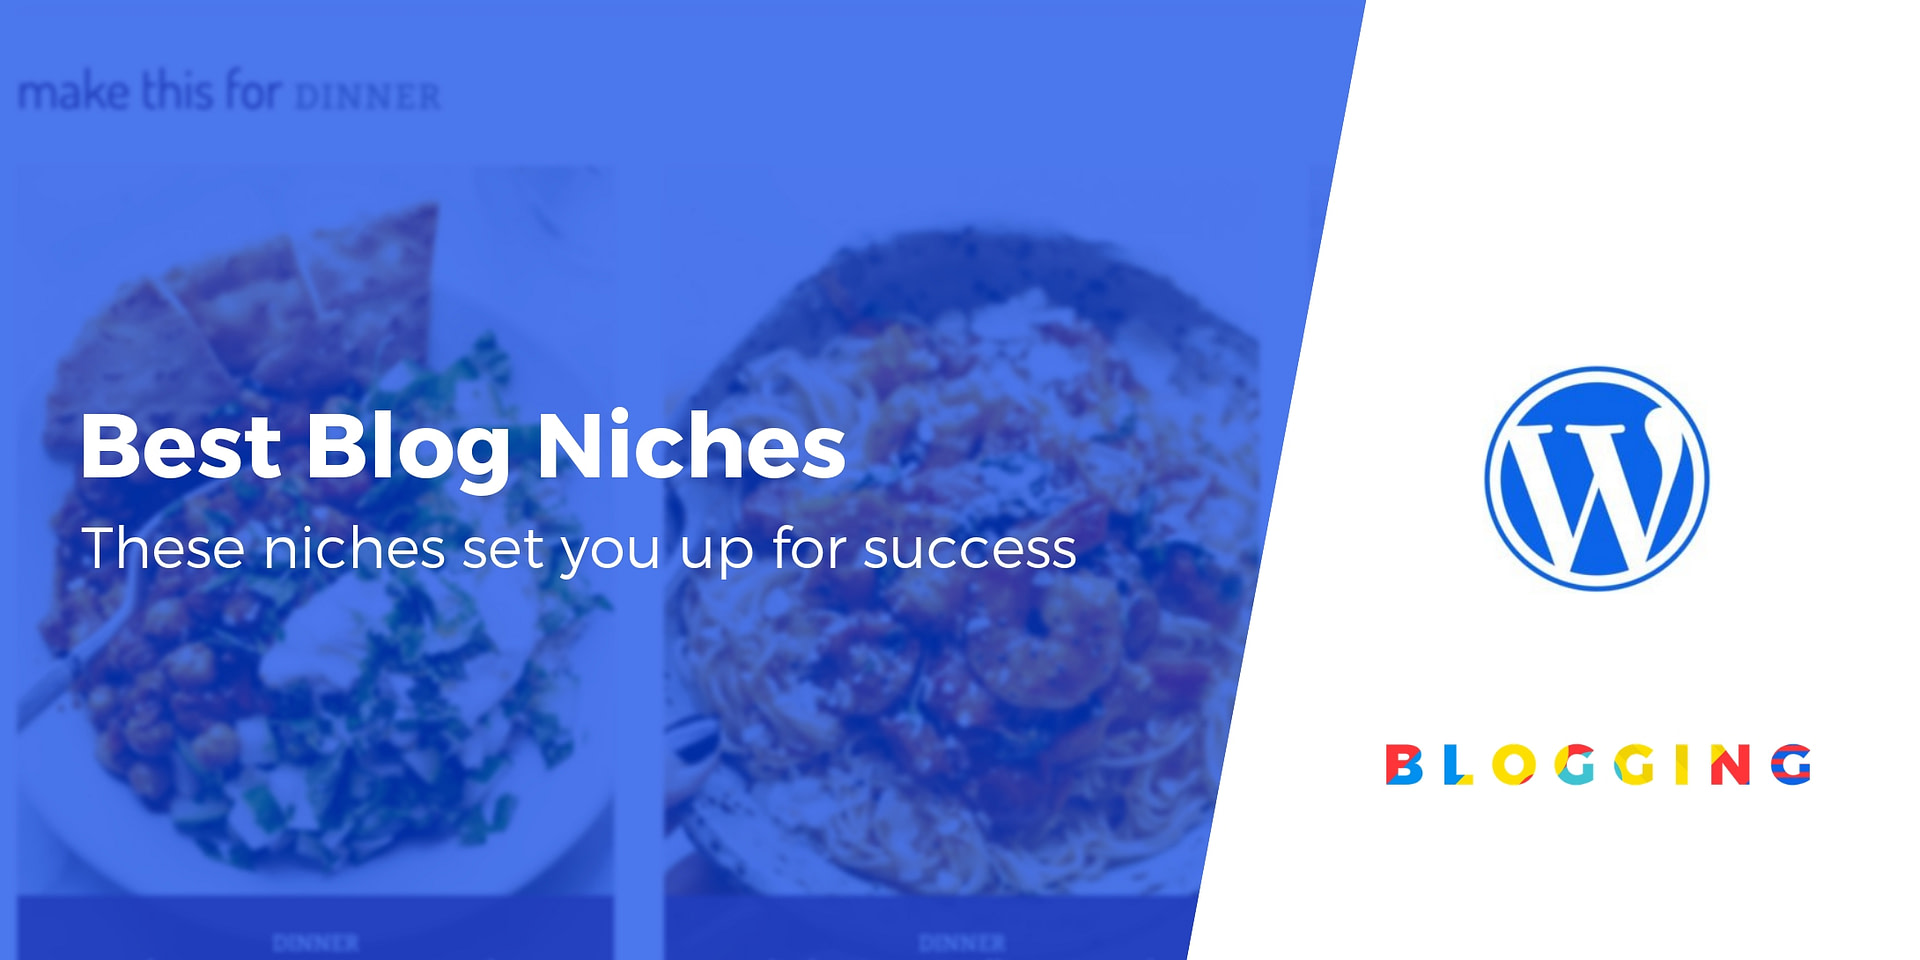 Best Blog Niches 5 Topics That Set You Up for Success